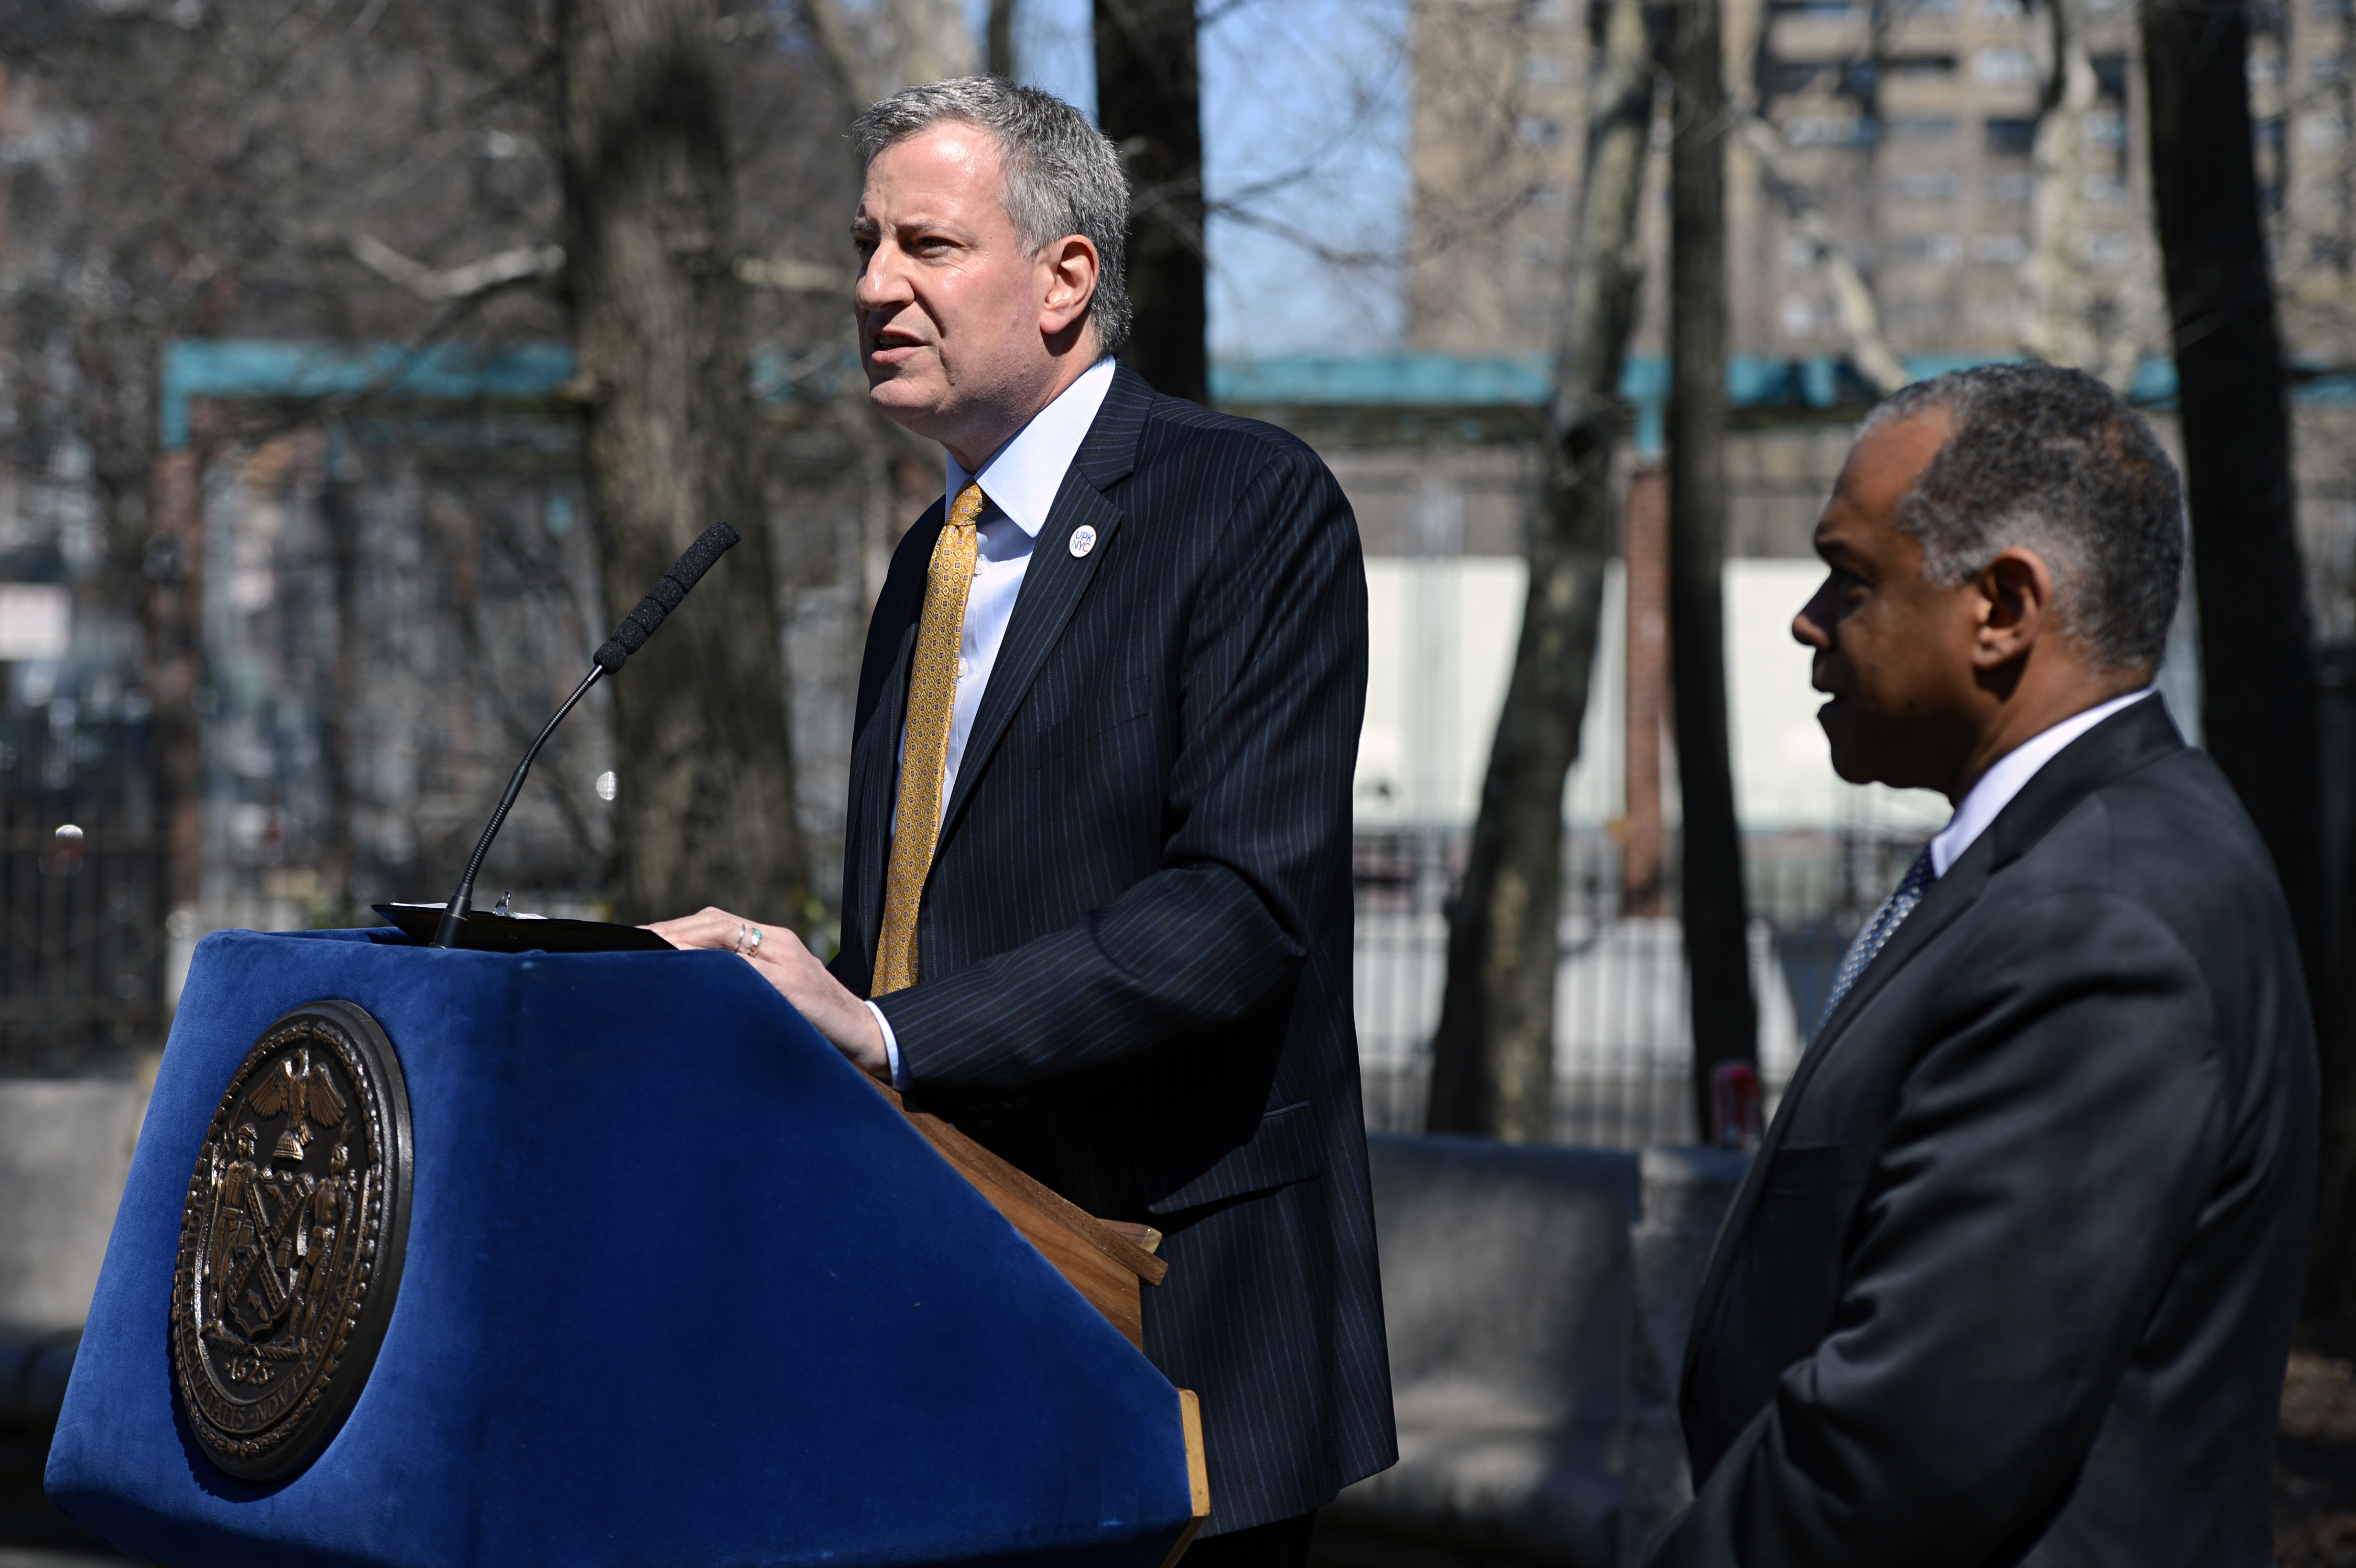 Mayor Bill de Blasio announcing his new Parks Commissioner Mitchell Silver in Seward Park in Chinatown. (Photo: Rob Bennett for the Office of Mayor Bill de Blasio)